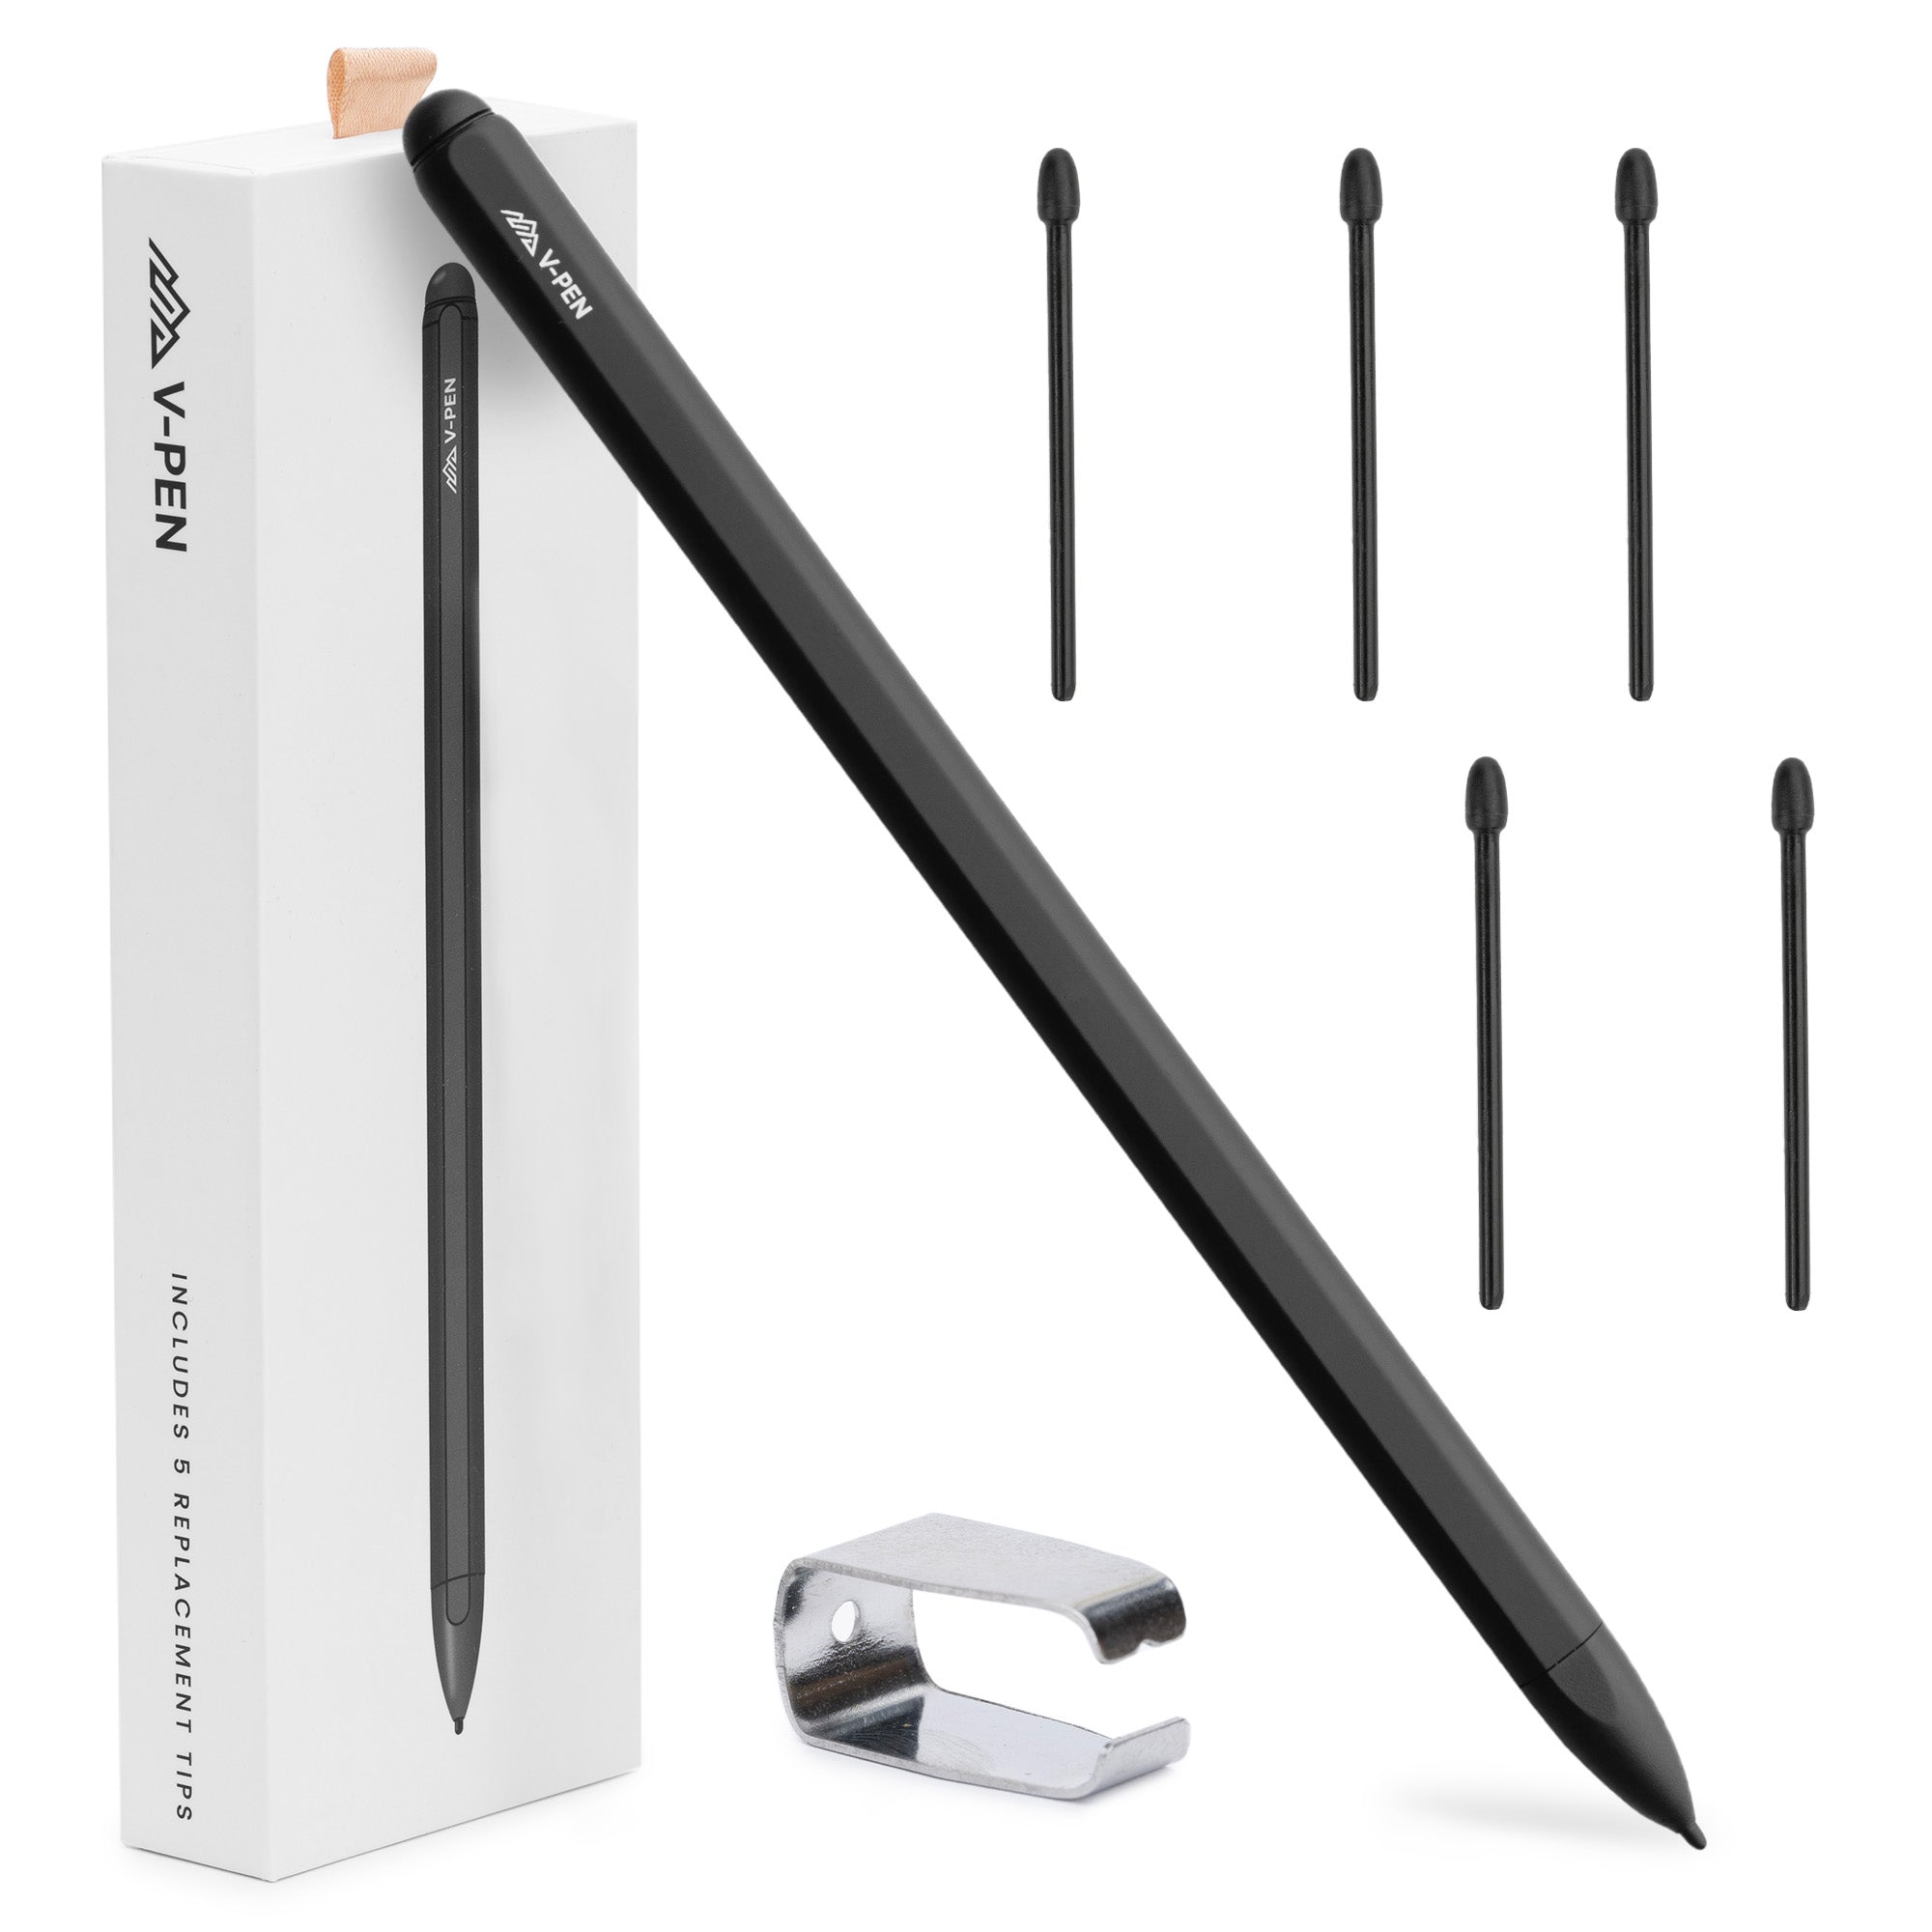 V-PEN EMR Stylus with Soft Digital Eraser + 5 Extra Tips | 4096 Pressure Sensitivity | Palm Rejection Compatible with Remarkable 2 Pen Tips & More | No Charging Required for Kindle Scribe Pen